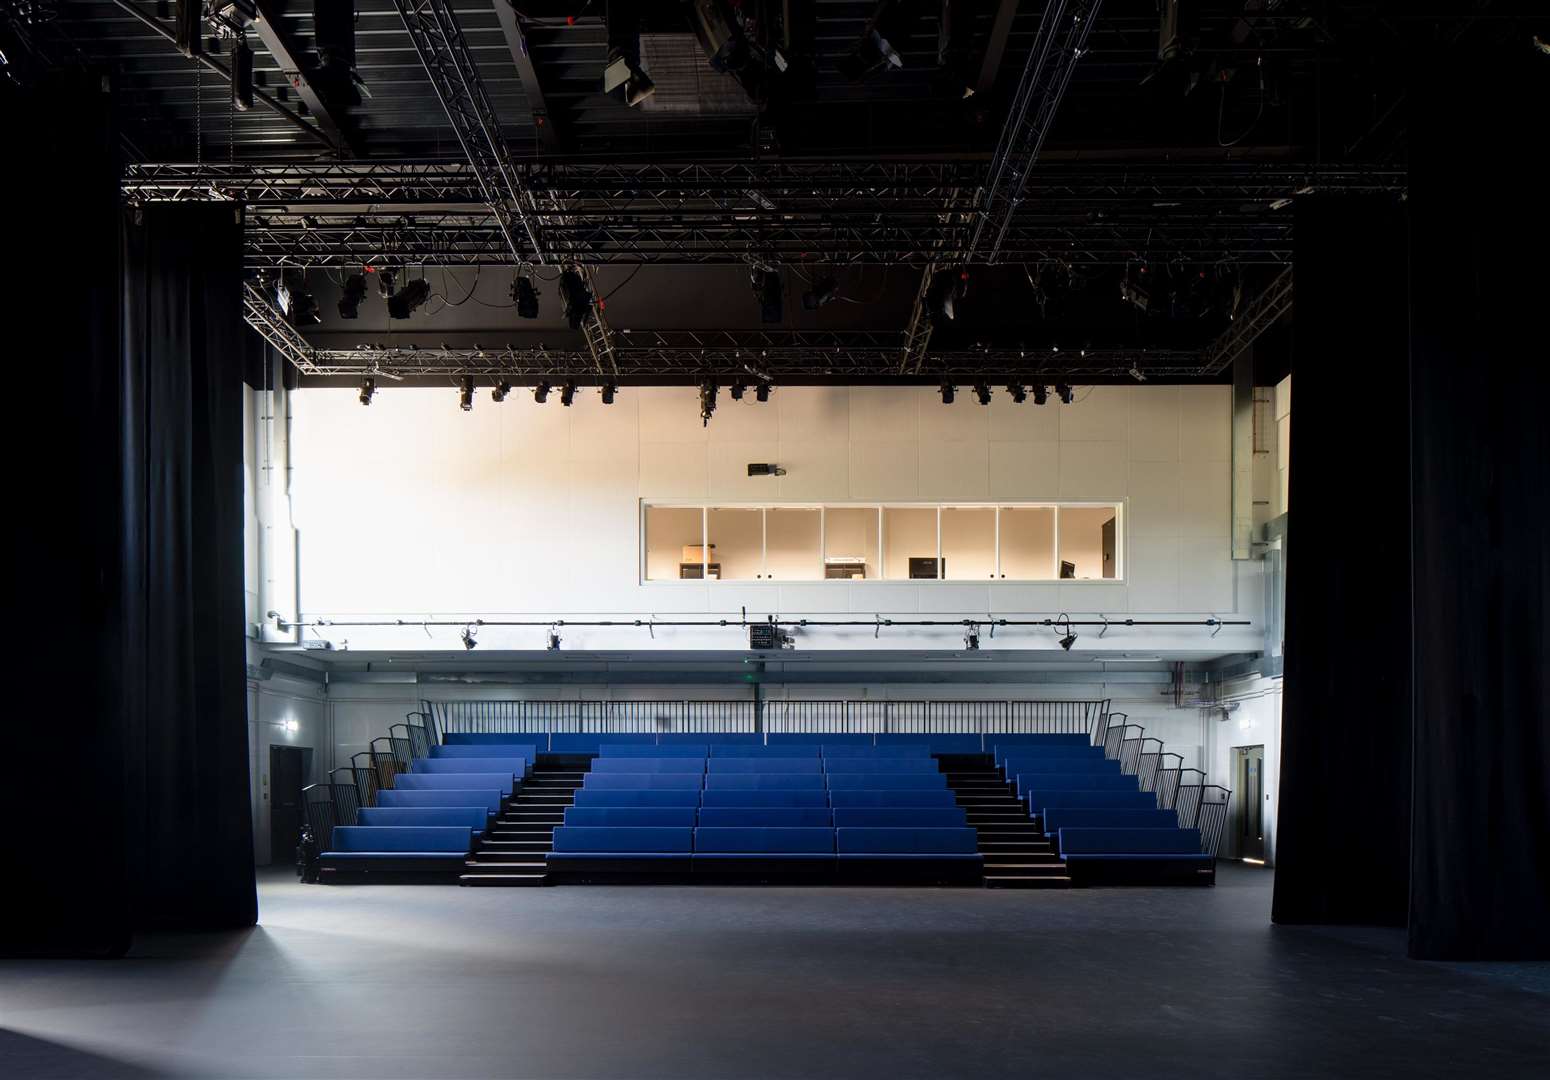 JV1, the auditorium and production space